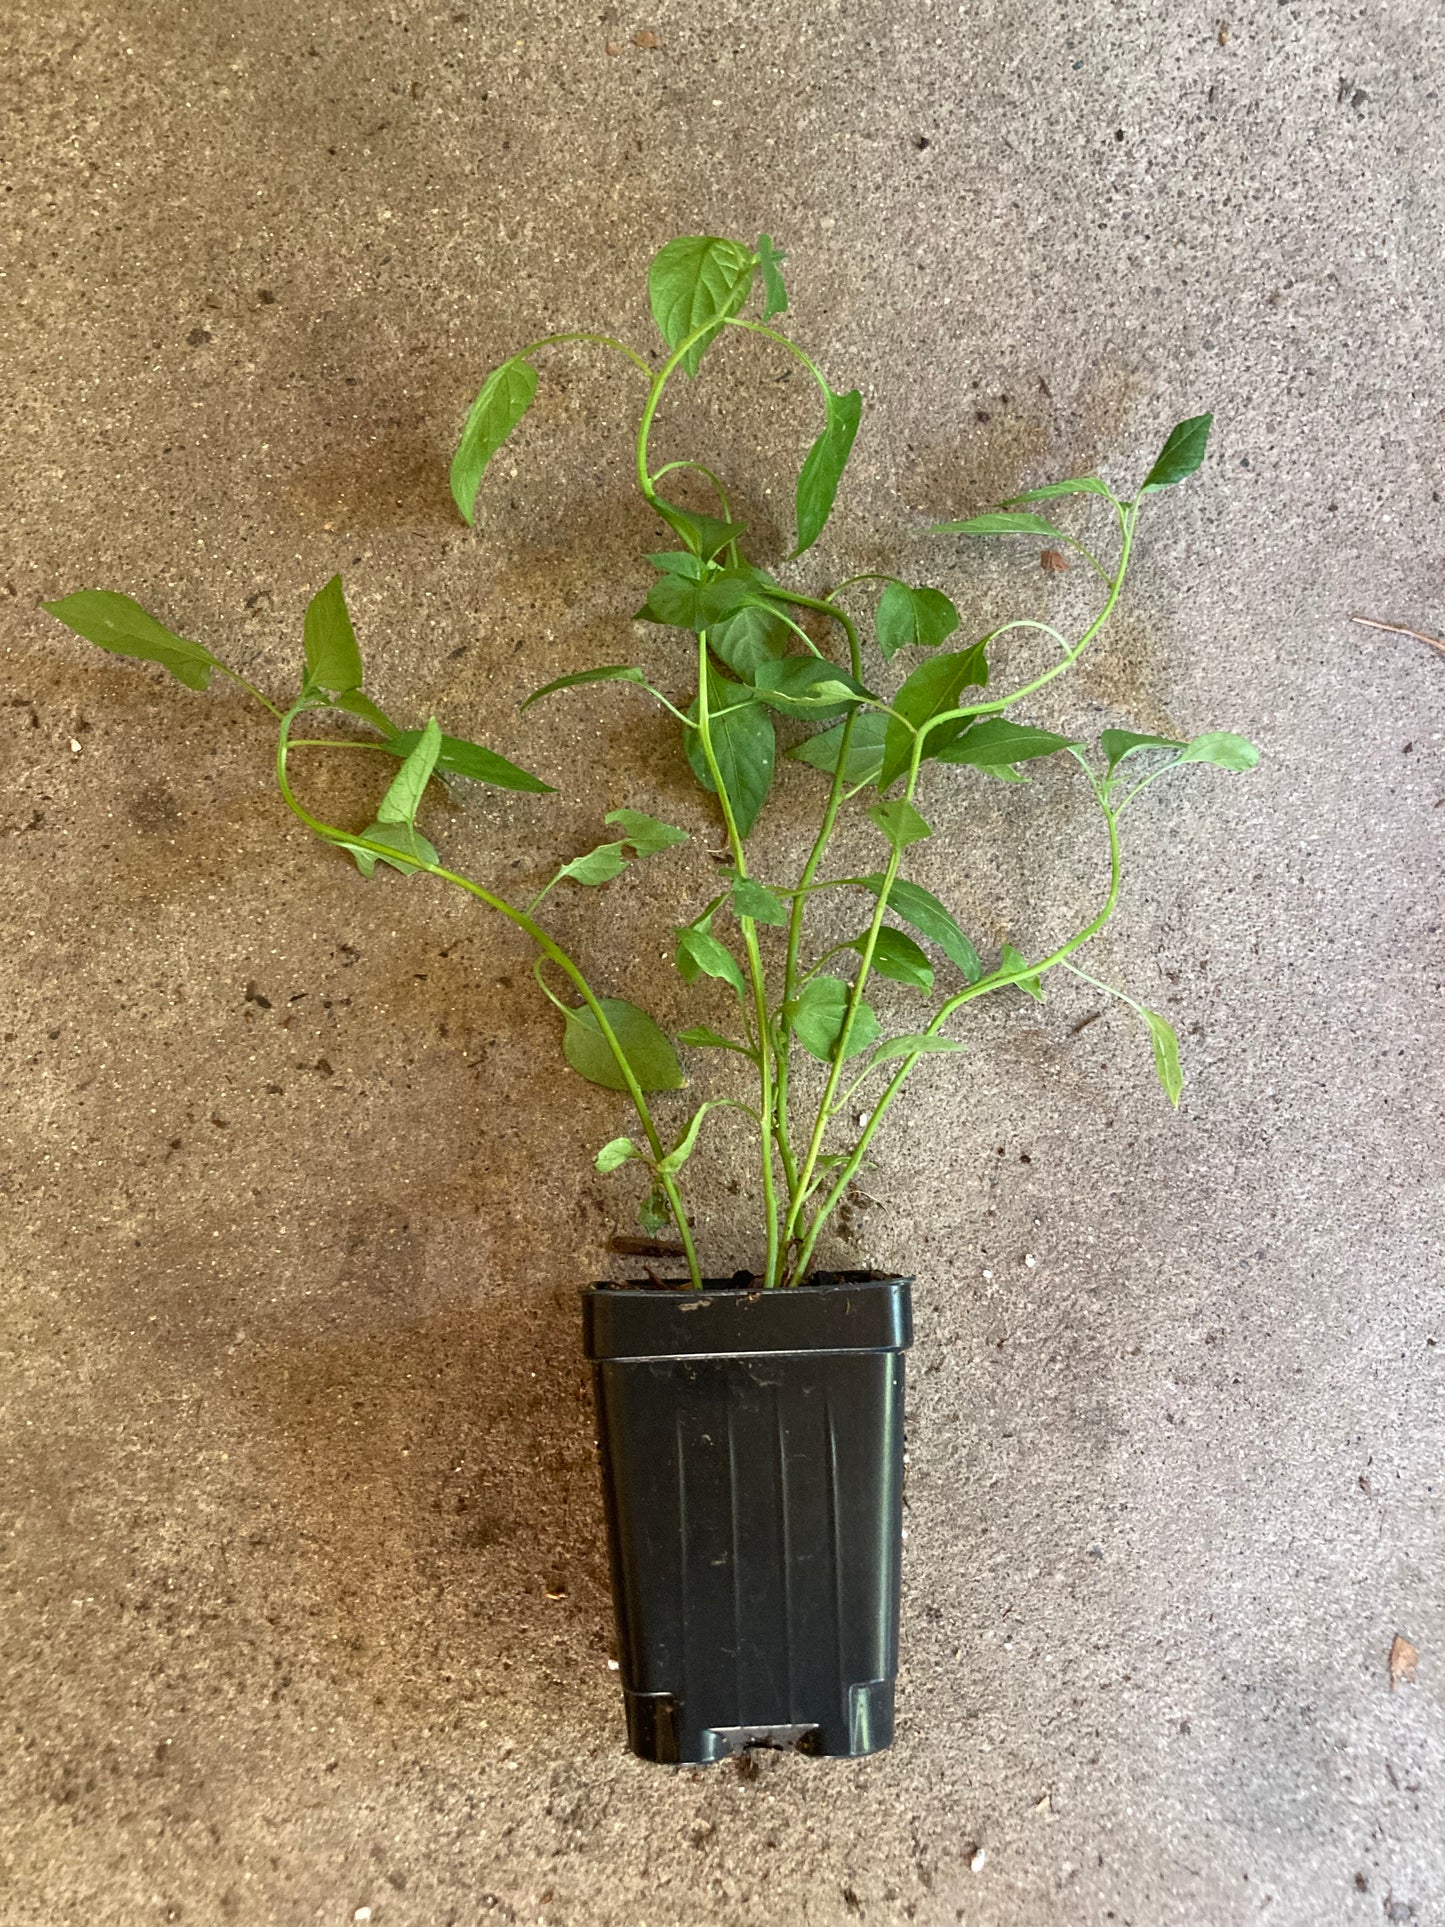 Mystery Open Pollinated Hot Pepper Mix 5 Non GMO Live Plants in 3.5" Pot